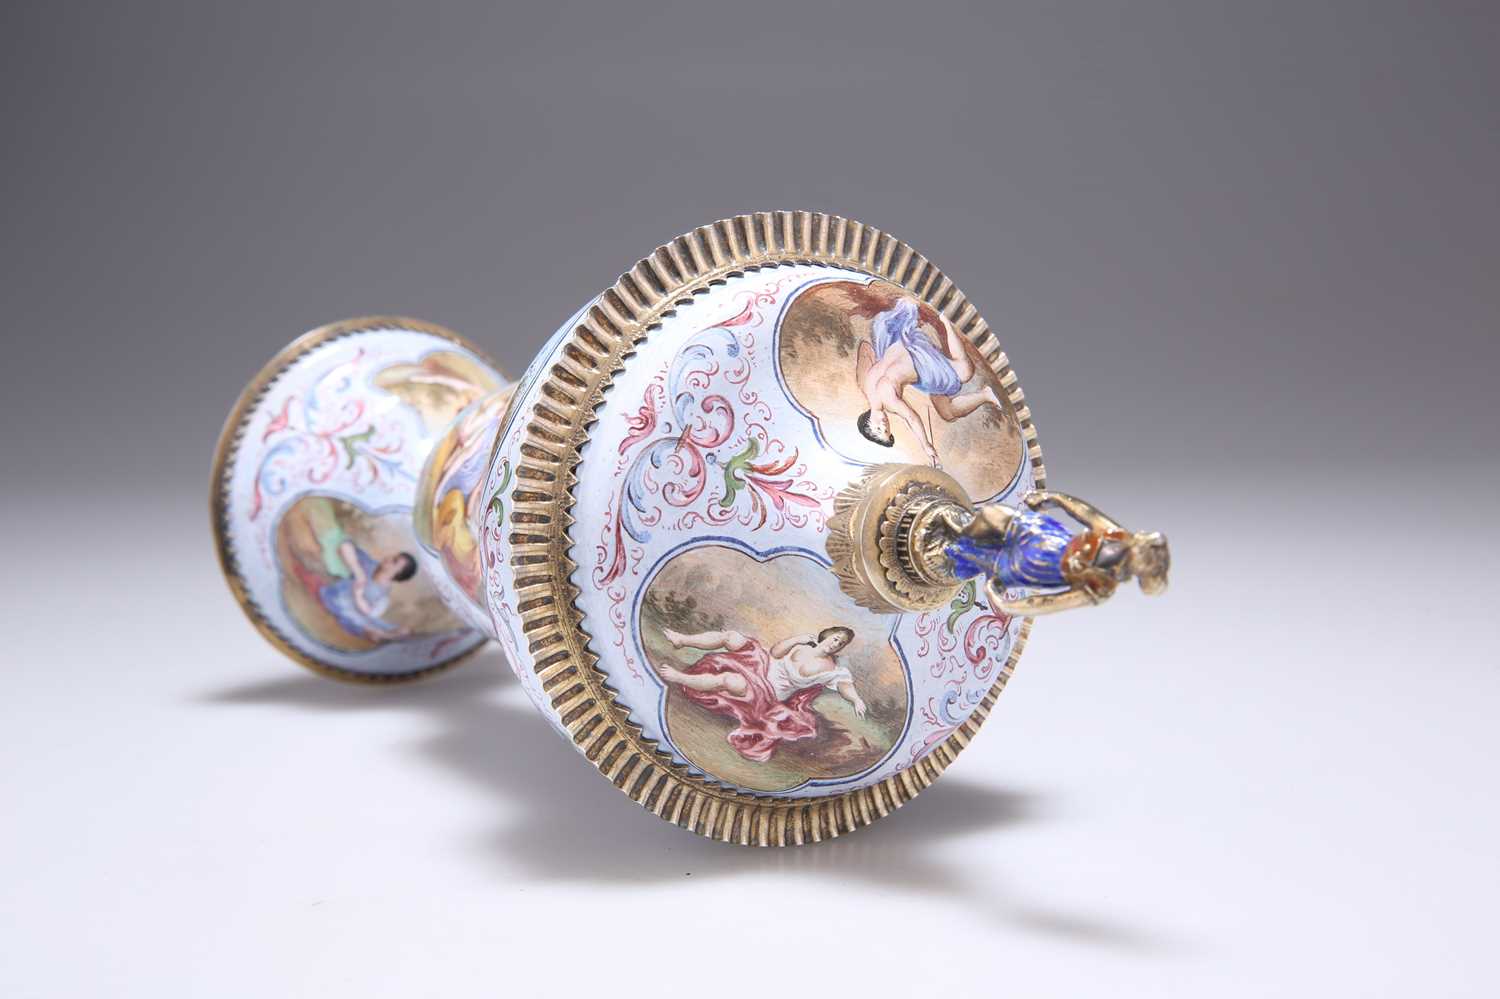 A FINE VIENNESE ENAMEL AND SILVER-GILT CUP AND COVER, BY HERMANN BOHM, CIRCA 1870 - Image 4 of 4